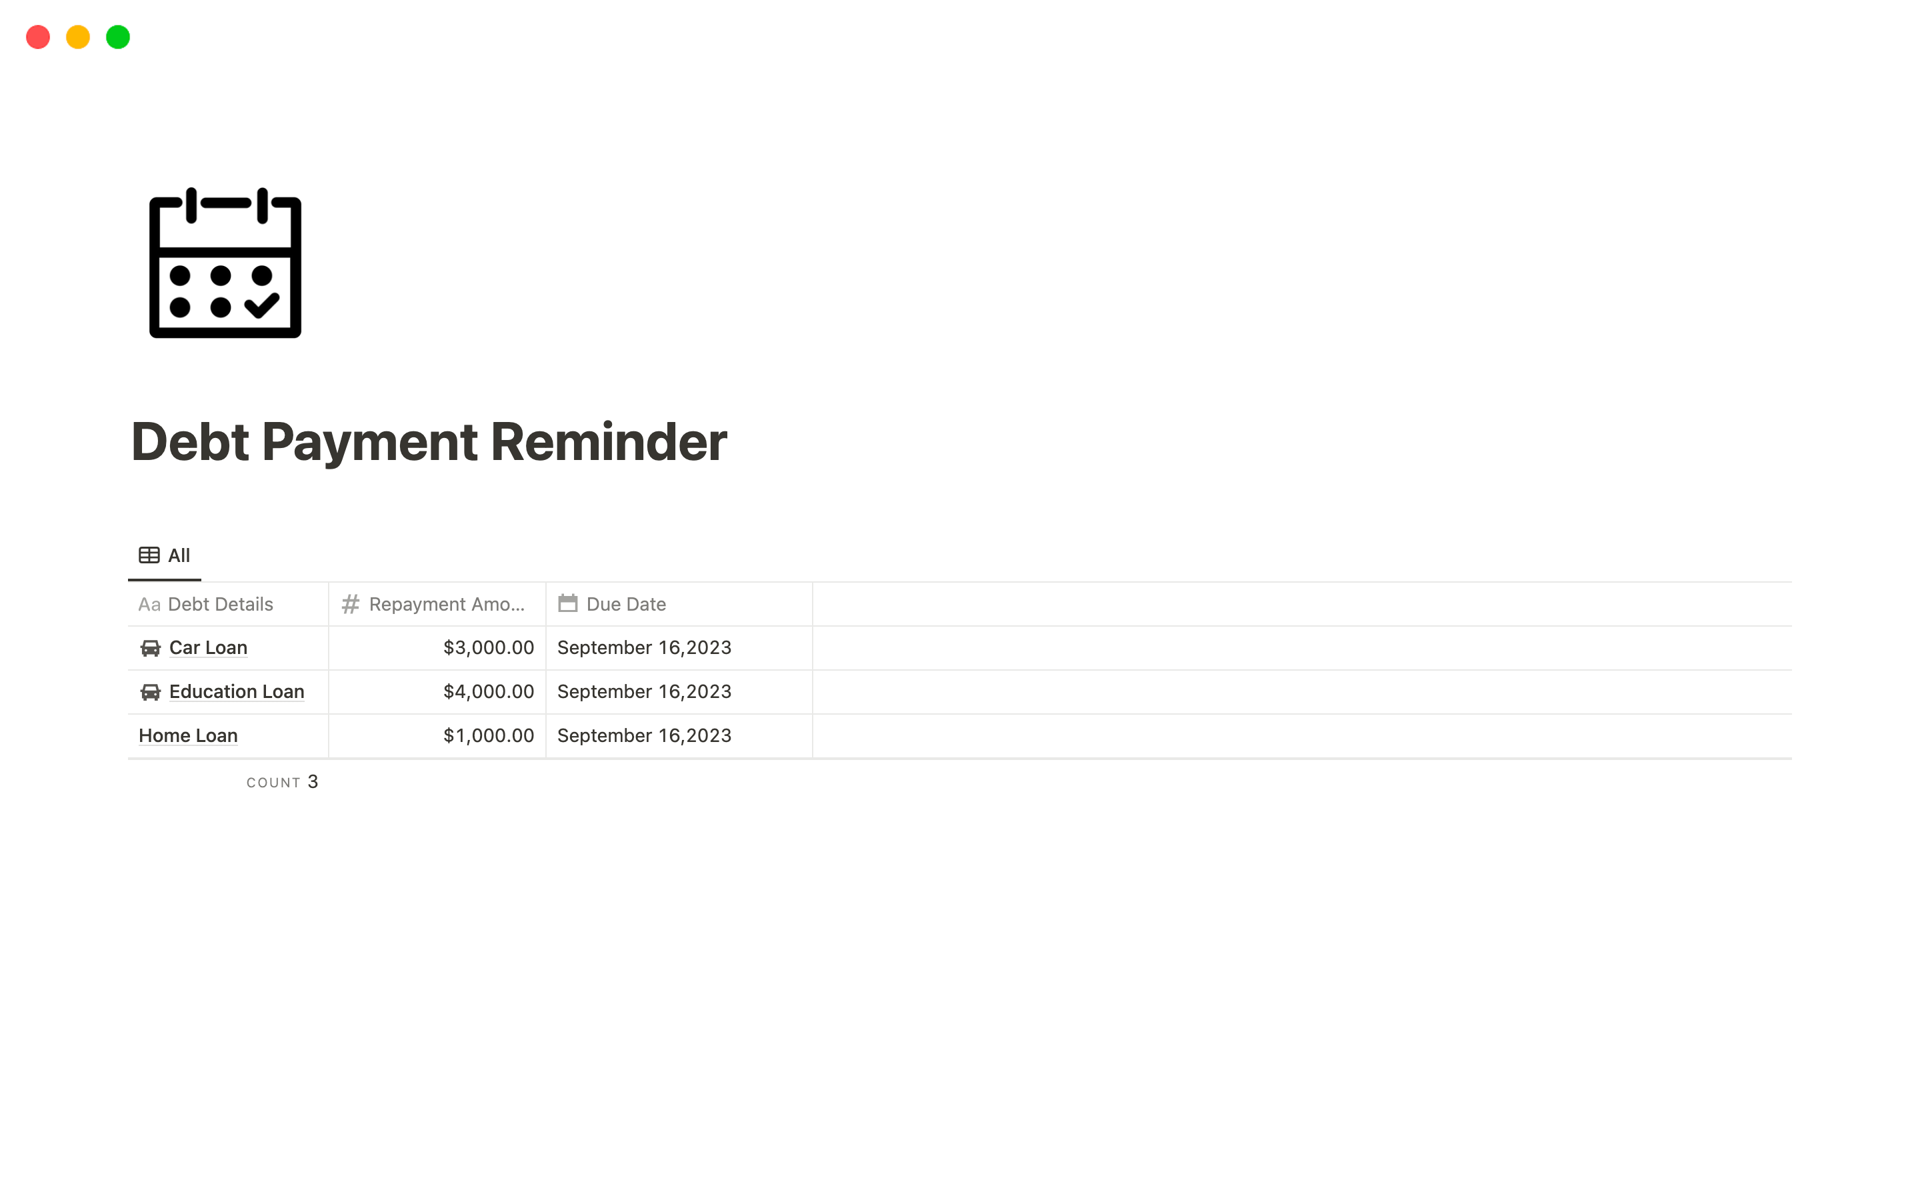 This template helps you receive debt repayment notification alerts directly on your WhatsApp on assigned due dates with the power of automation